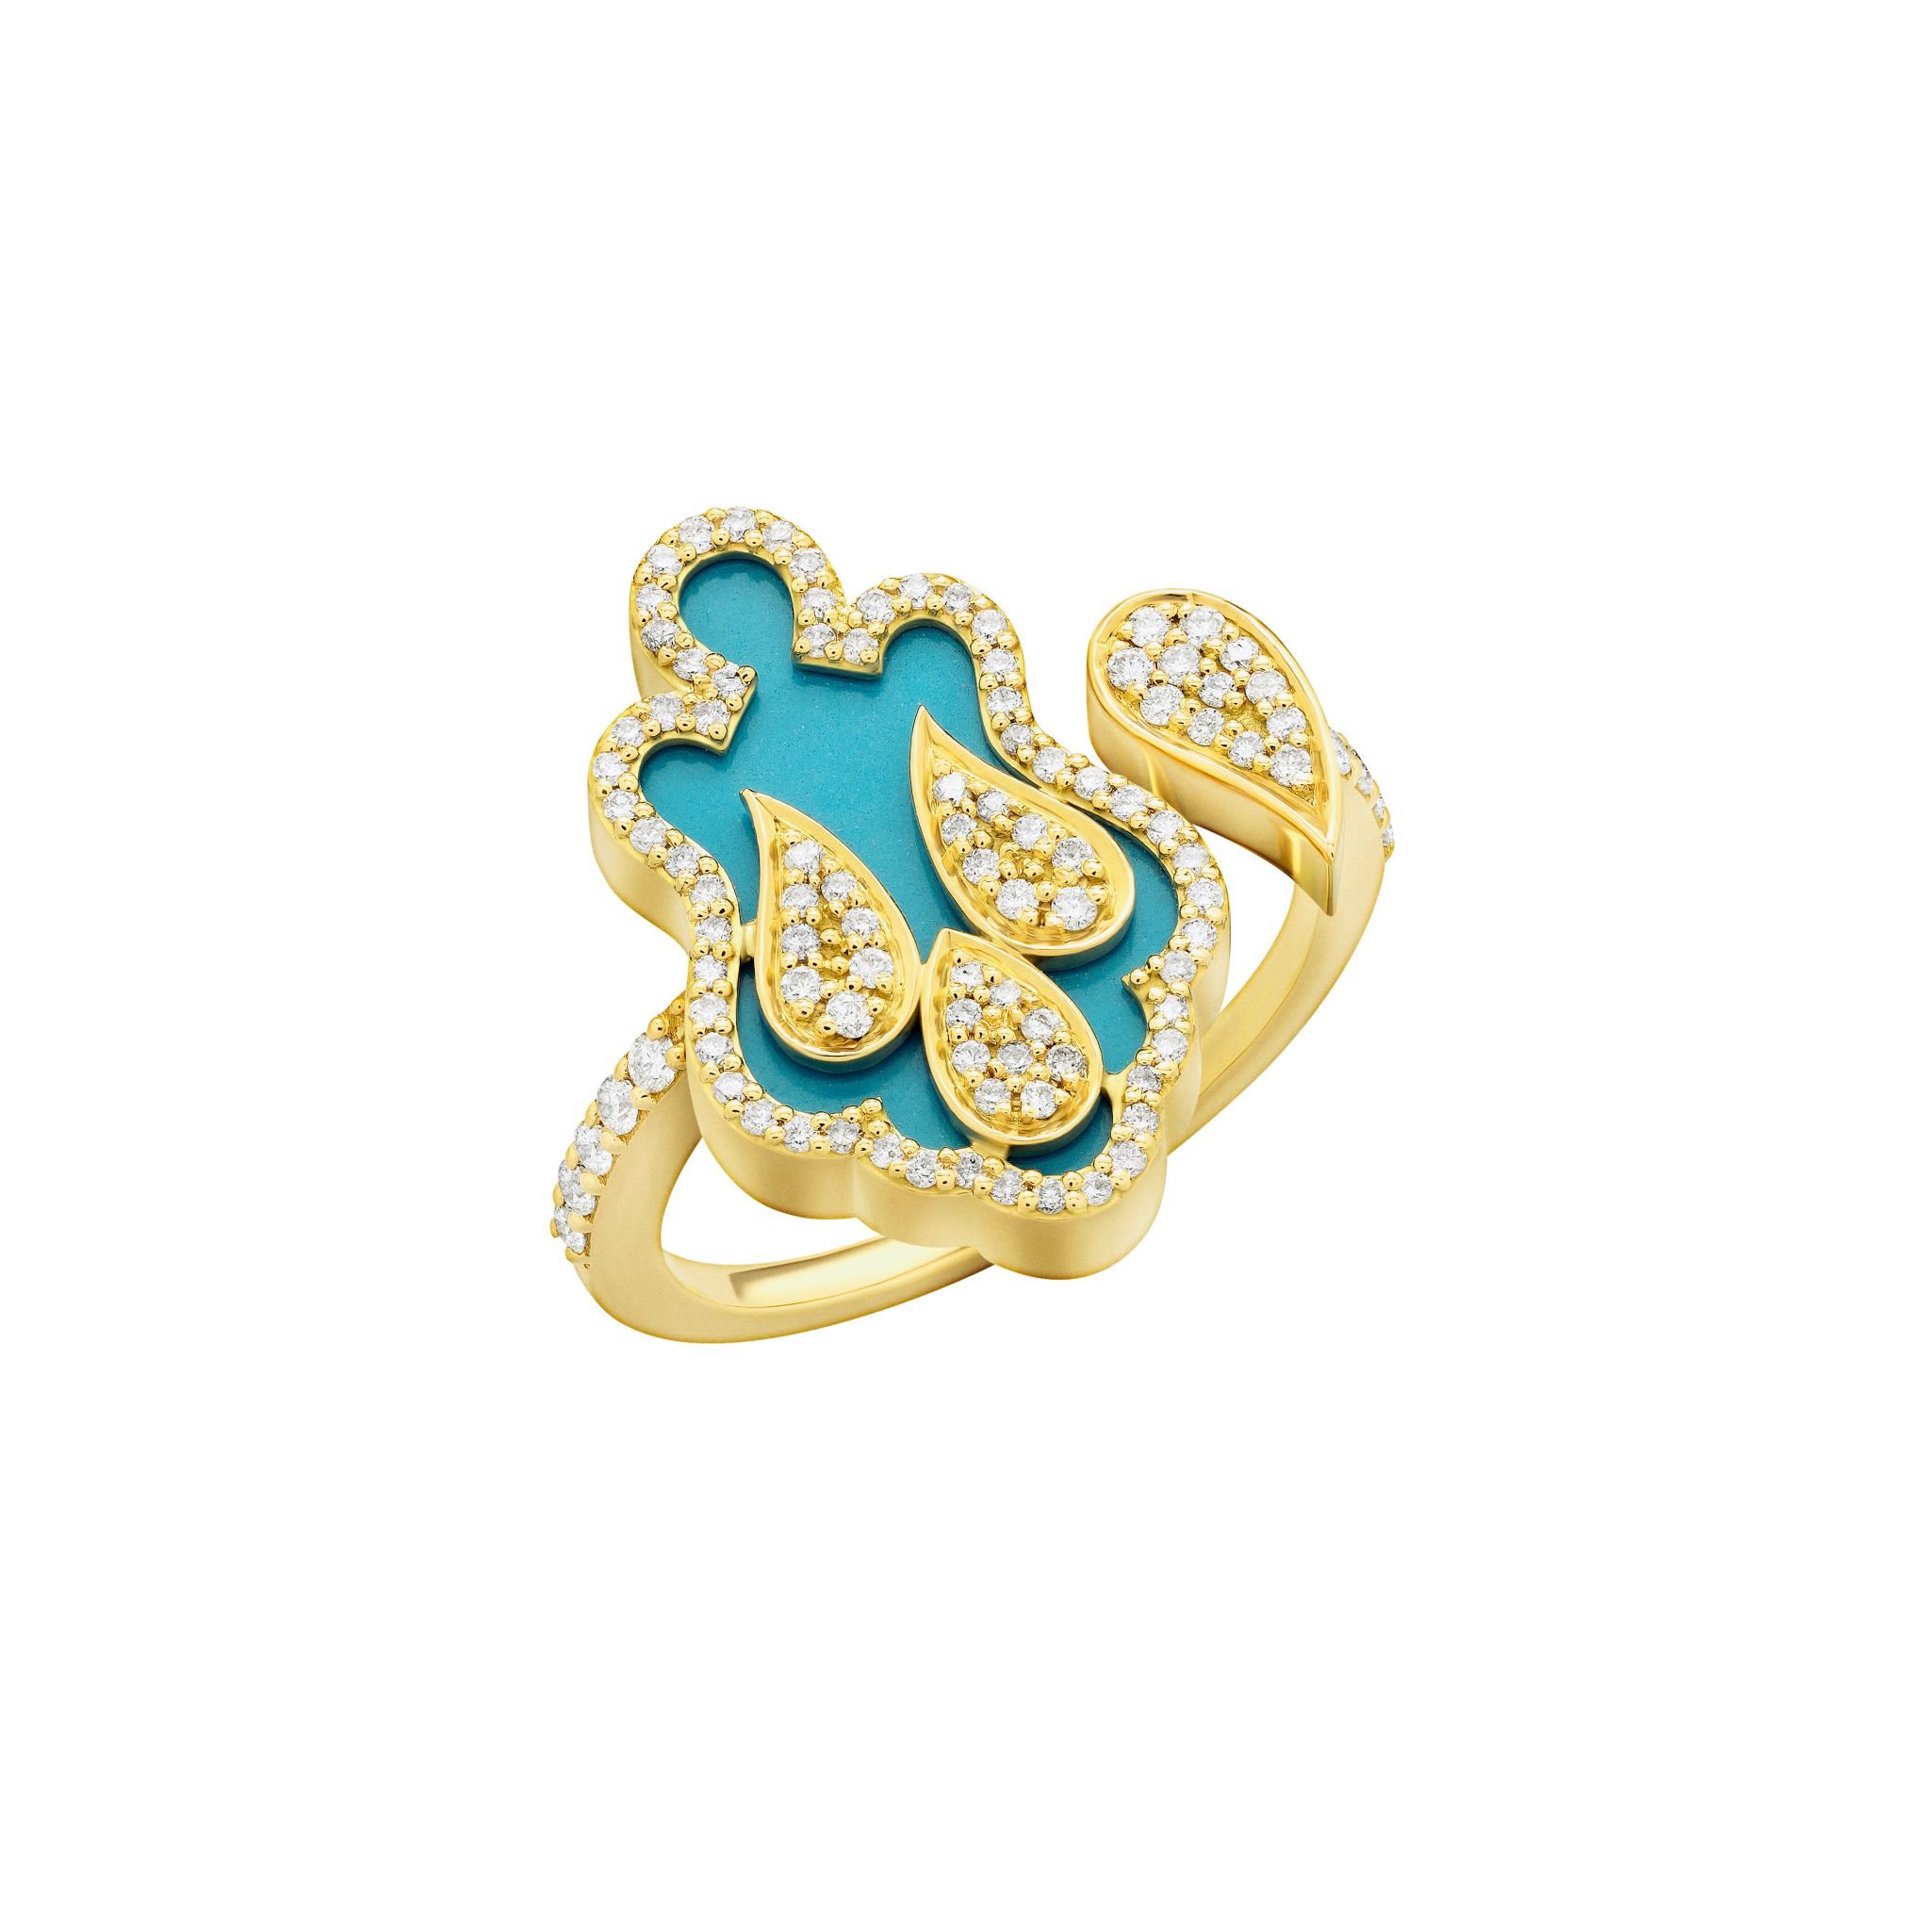 Asala Gold Diamond and Turquoise Ring